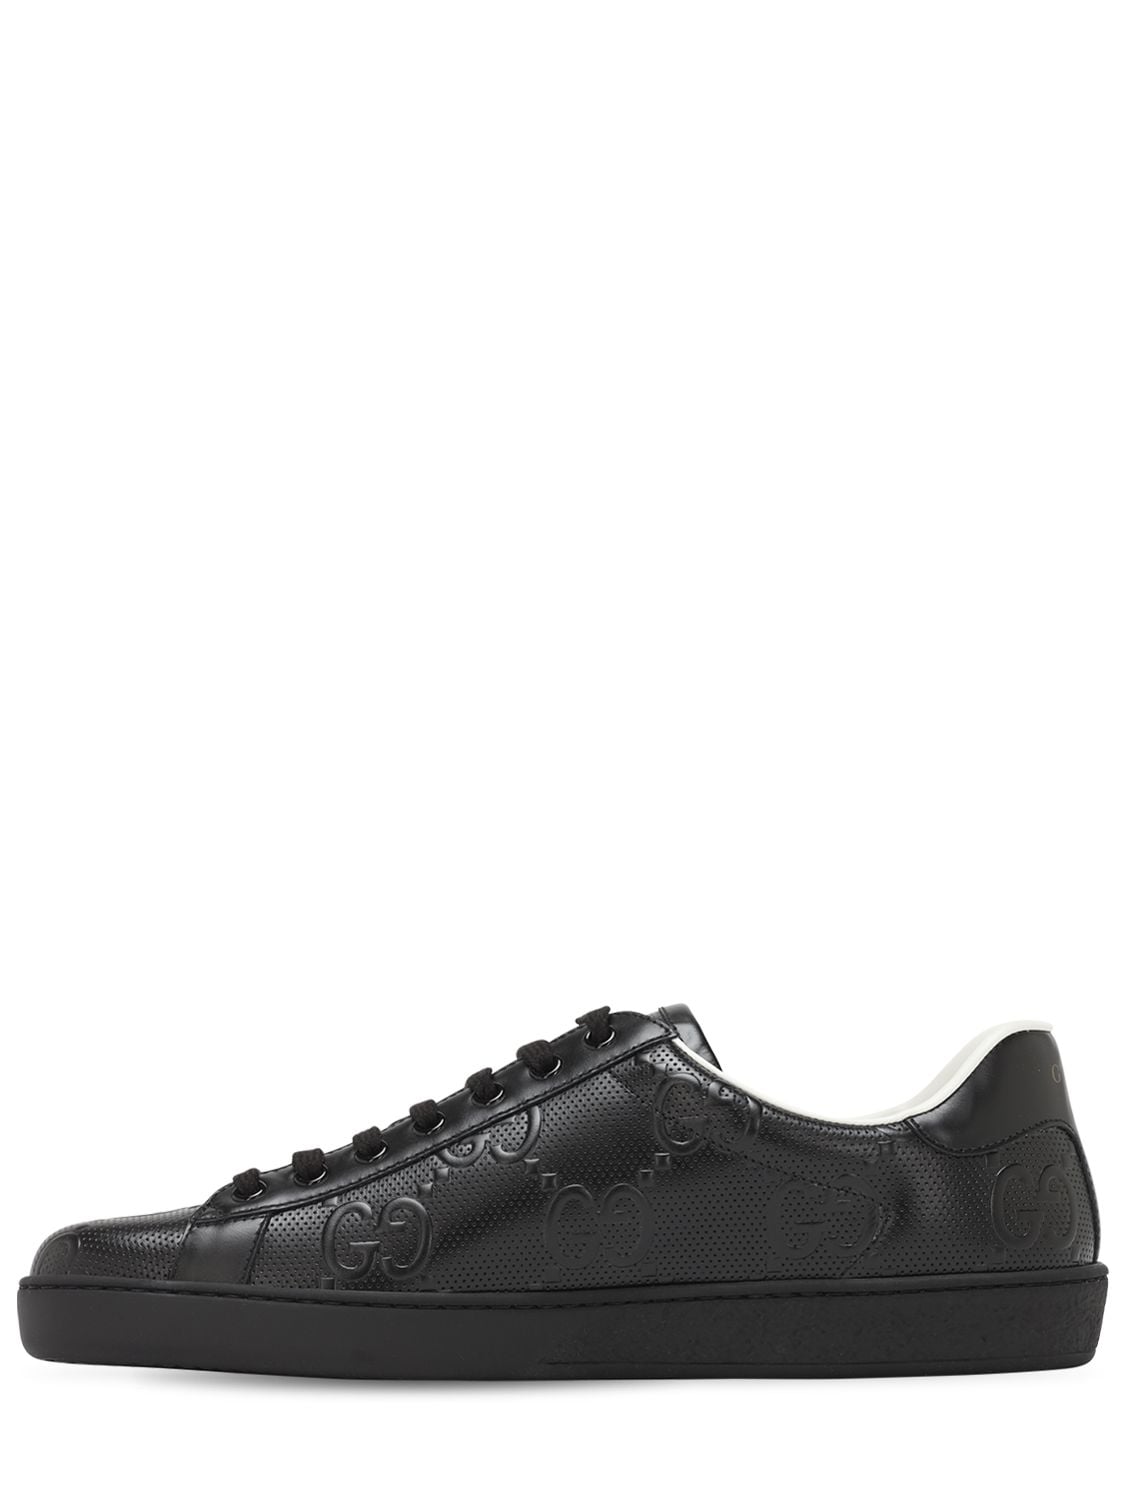 Gucci Ace Gg Embossed Sneakers In Black | ModeSens